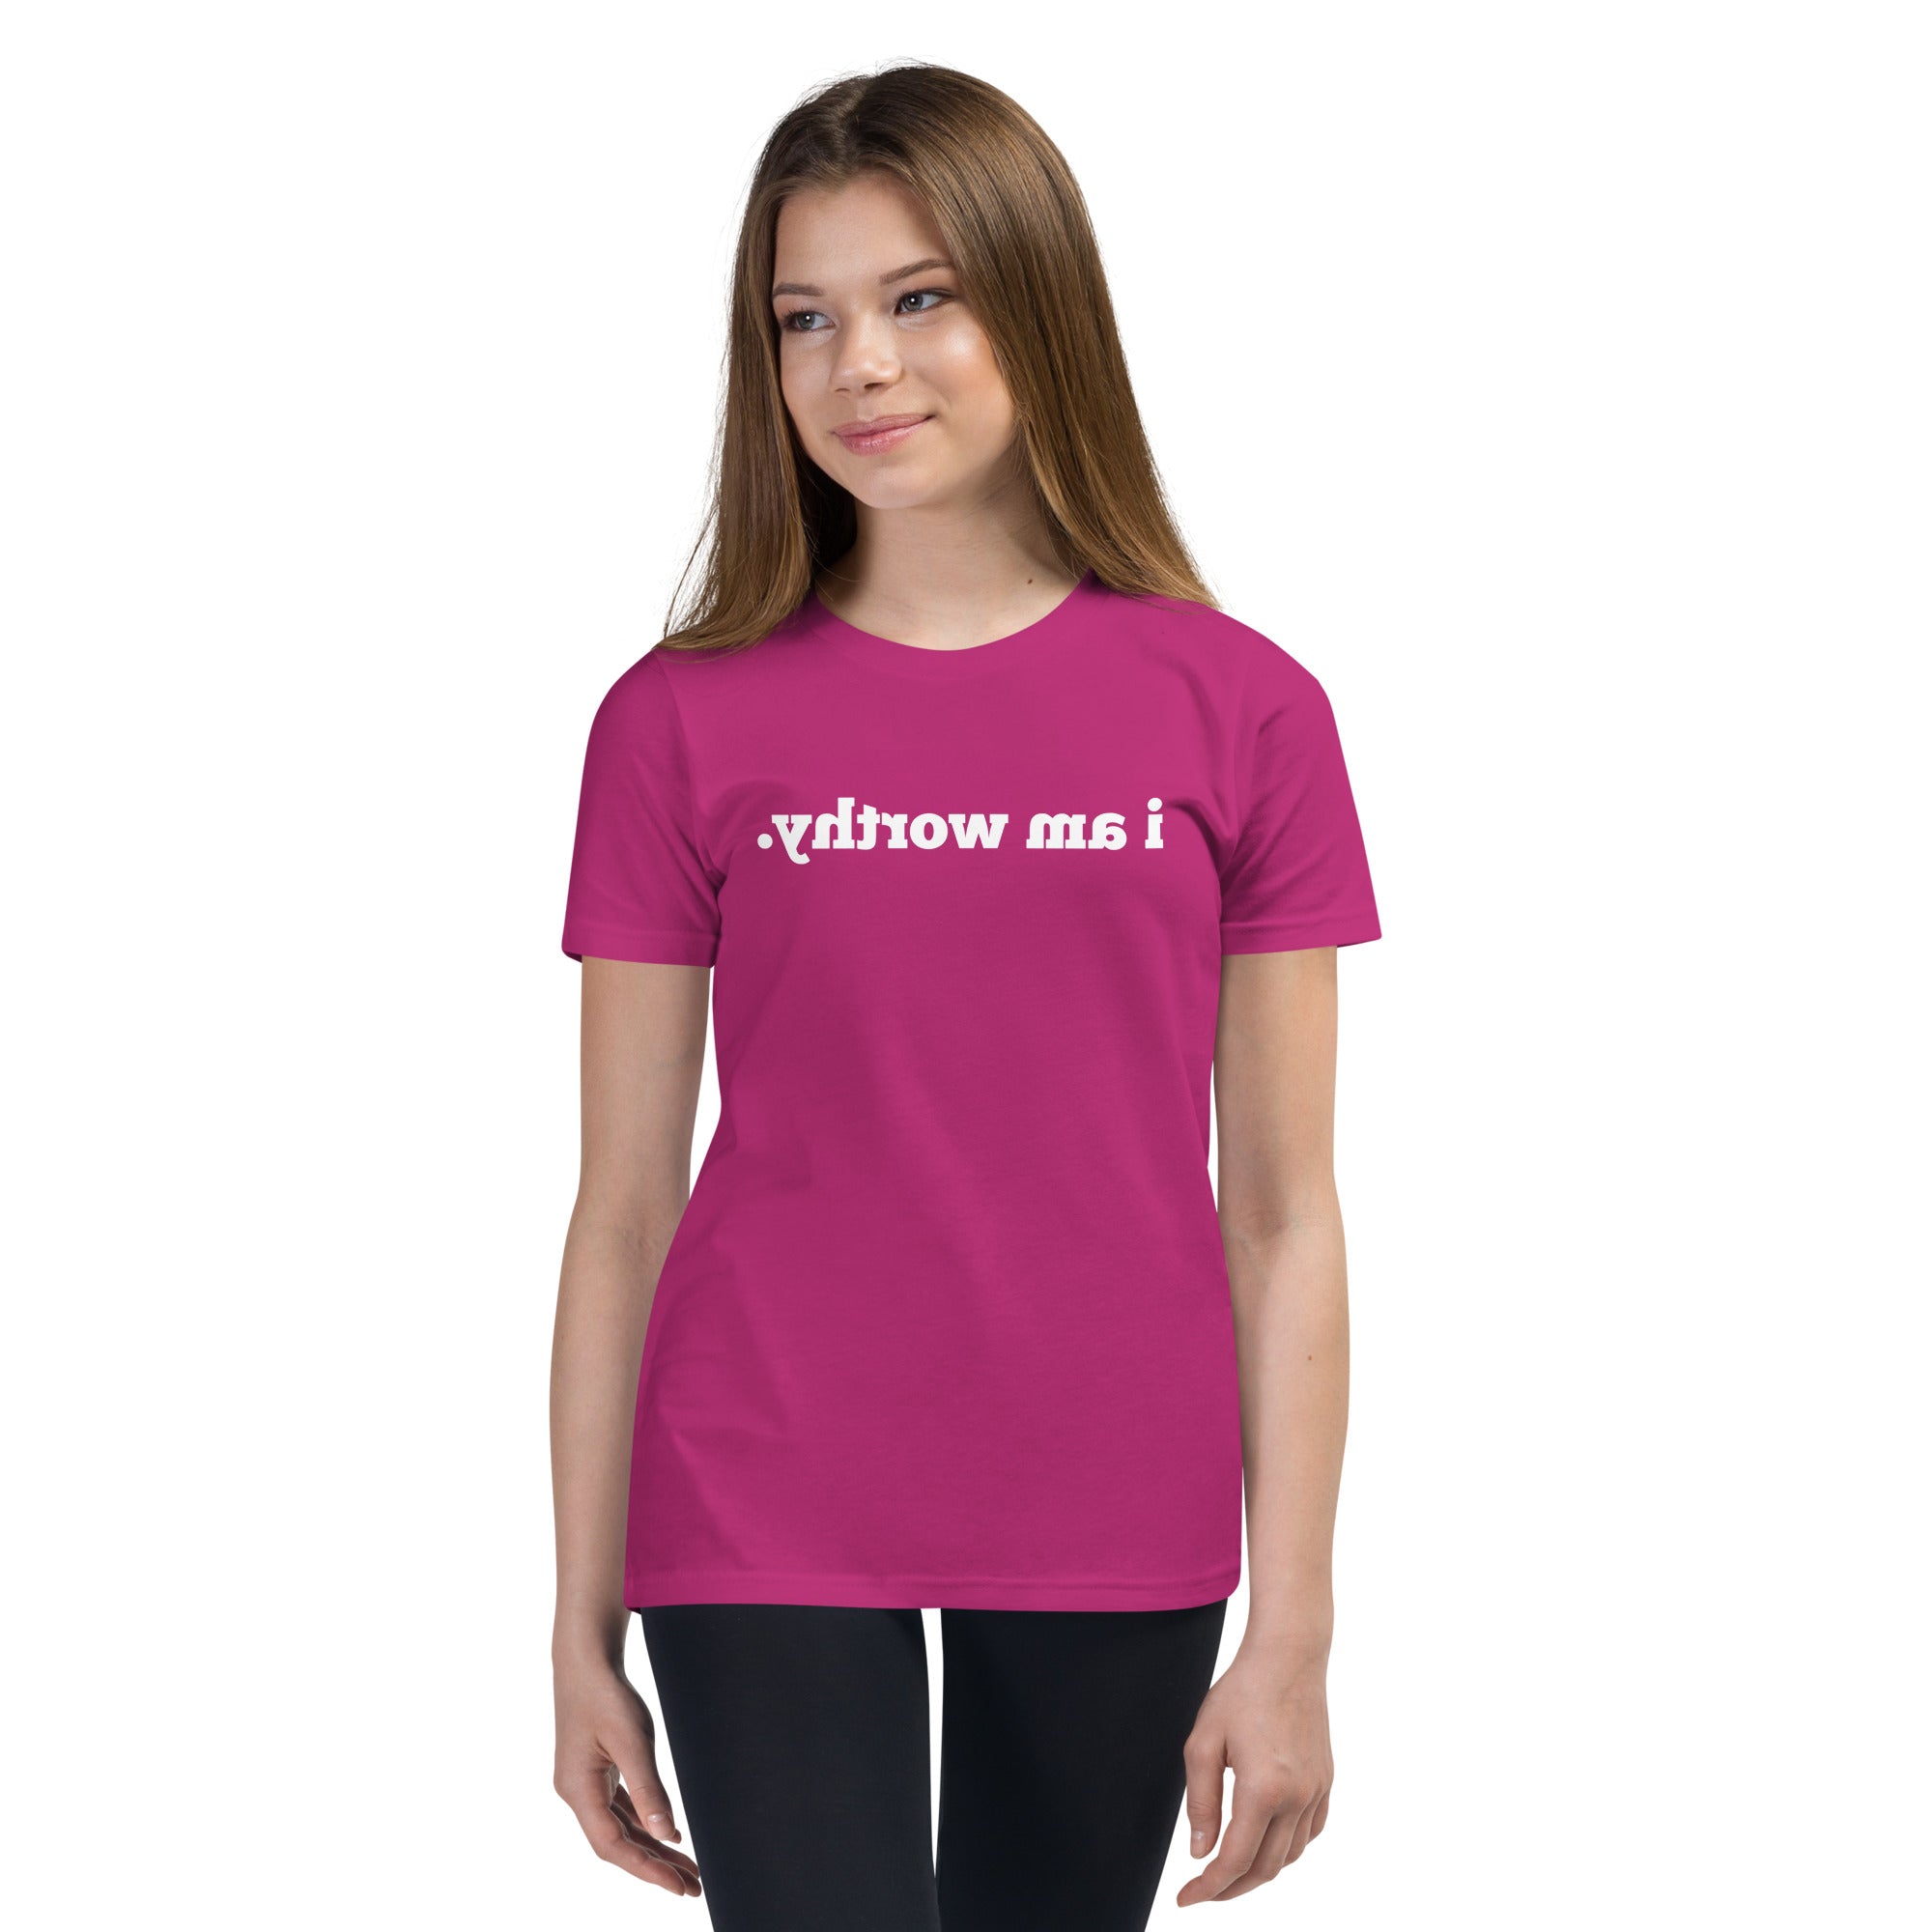 I AM WORTHY Mirror Affirmation Tee (Youth, Short-Sleeve) - 10 COLORS!